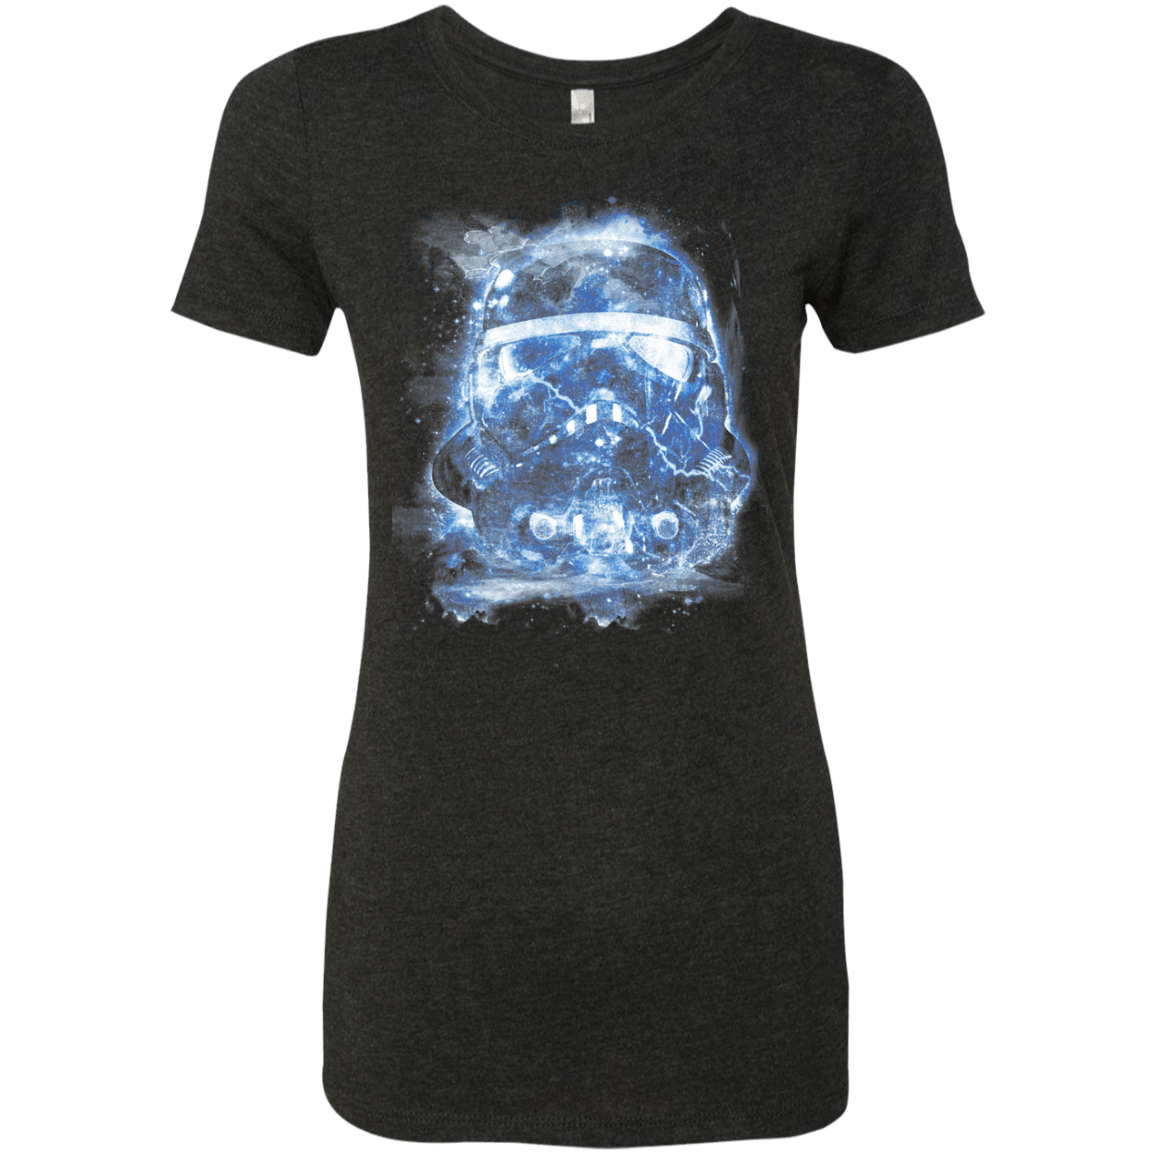 T-Shirts Vintage Black / Small Trooper in storm Women's Triblend T-Shirt